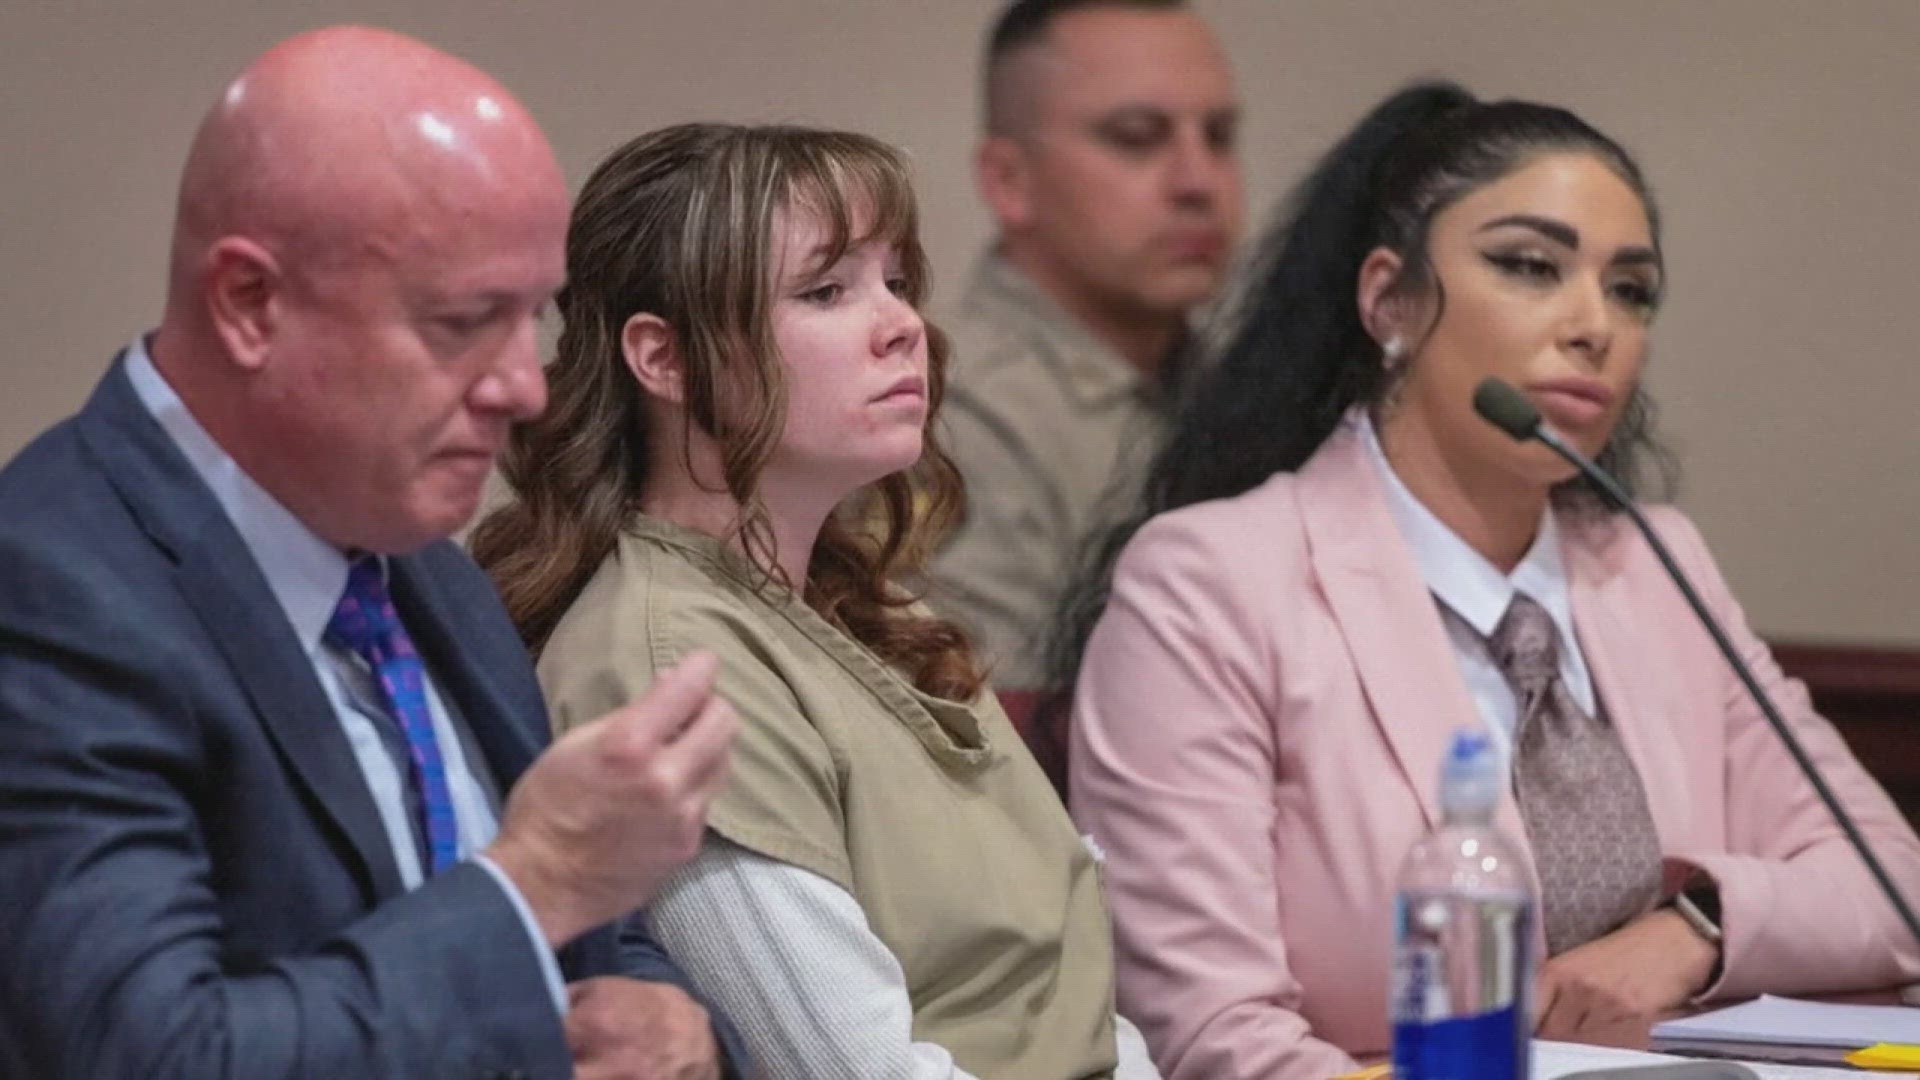 Prosecutors blamed Hannah Gutierrez-Reed for bringing live ammunition onto the set where it was prohibited and for failing to follow basic gun safety rules.